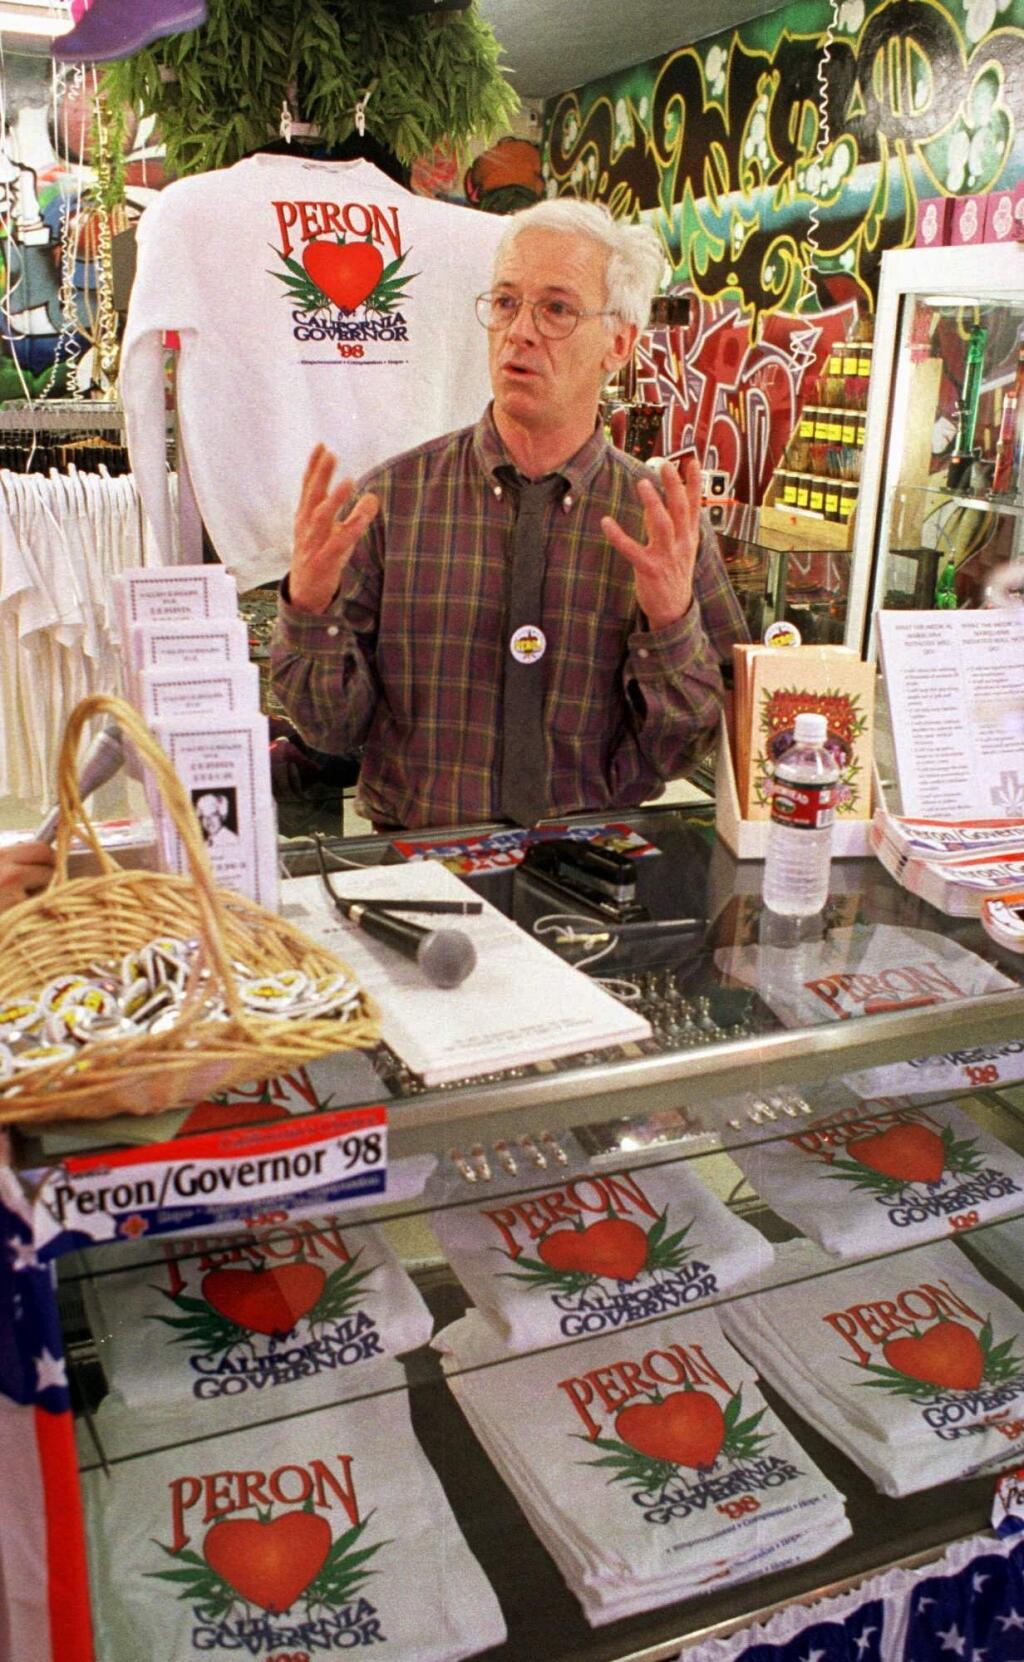 FILE - In this Jan. 17, 1998 file photo, California Republican gubernatorial candidate Dennis Peron gestures while speaking to supporters at the Rainbow Smoke Shop in San Jose, Calif. Peron, an activist who was among the first people to argue for the benefits of marijuana for AIDS patients and helped legalize medical pot in California, died Saturday, Jan. 27, 2018, at 72. The San Francisco Chronicle reported that Peron died in a hospital in the city. (AP Photo/Darryl Bush, File)